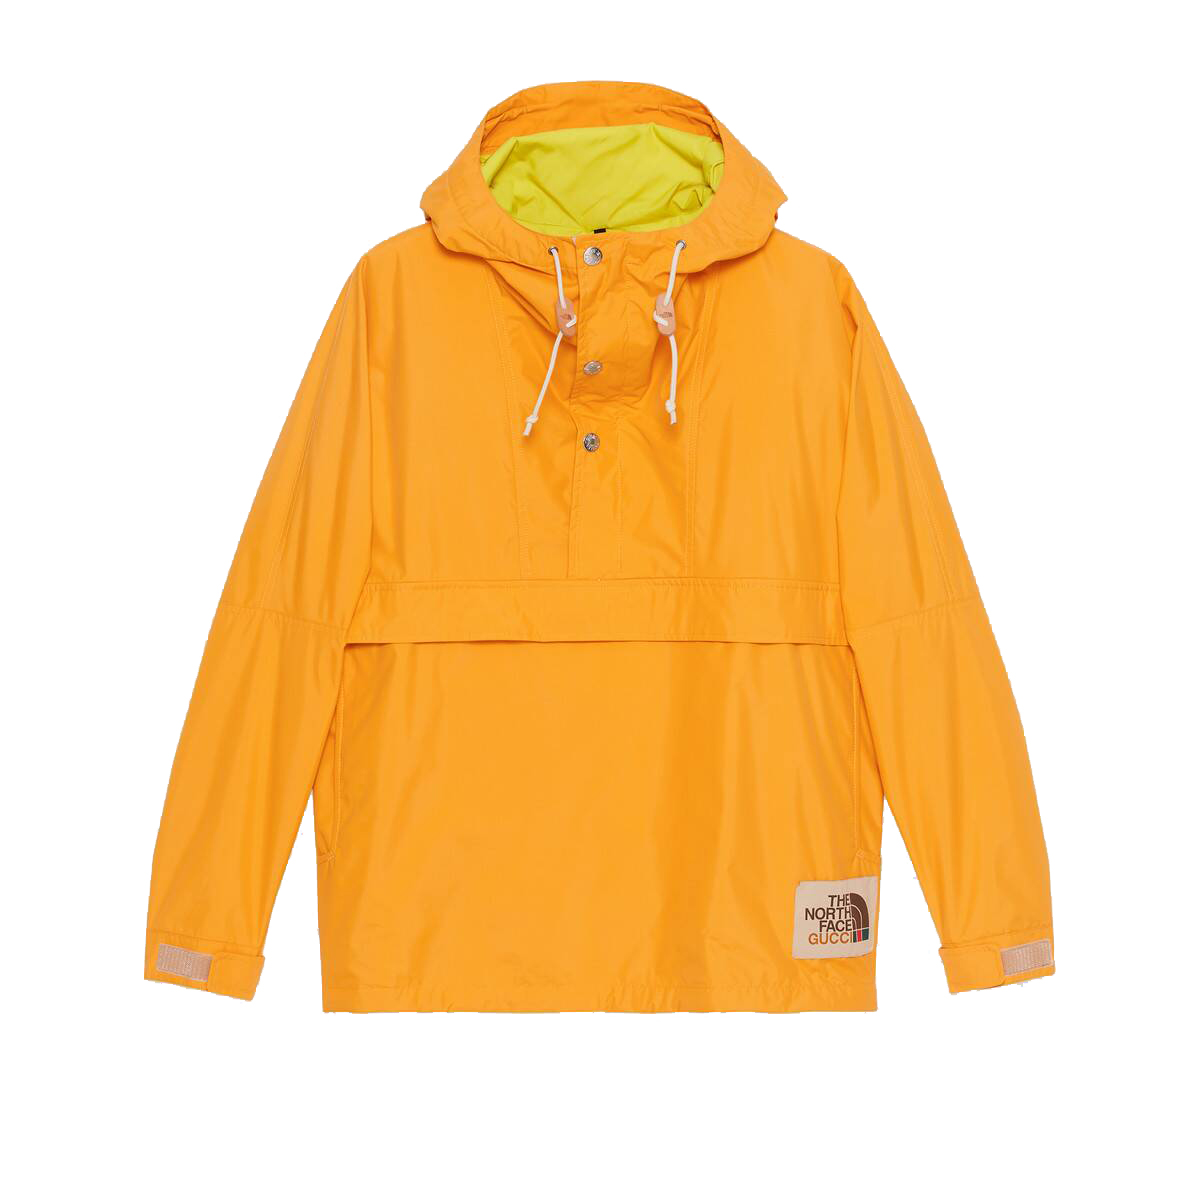 Gucci x The North Face Online Exclusive Nylon Wind Jacket Yellow